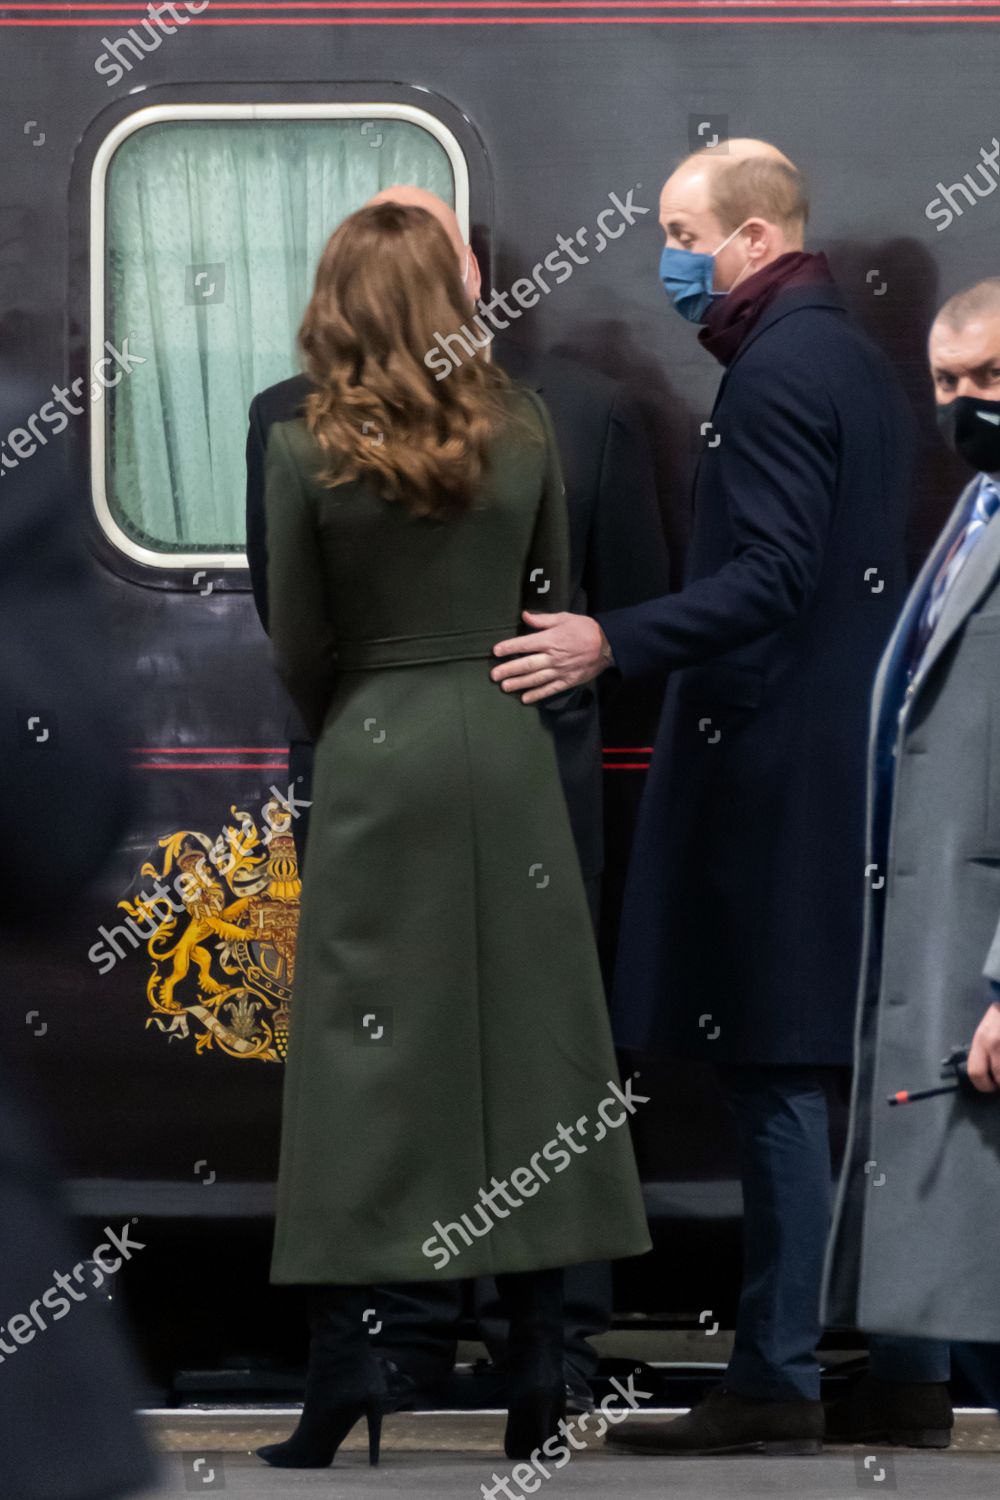 prince-william-and-catherine-duchess-of-cambridge-at-euston-station-london-uk-shutterstock-editorial-11244089n.jpg